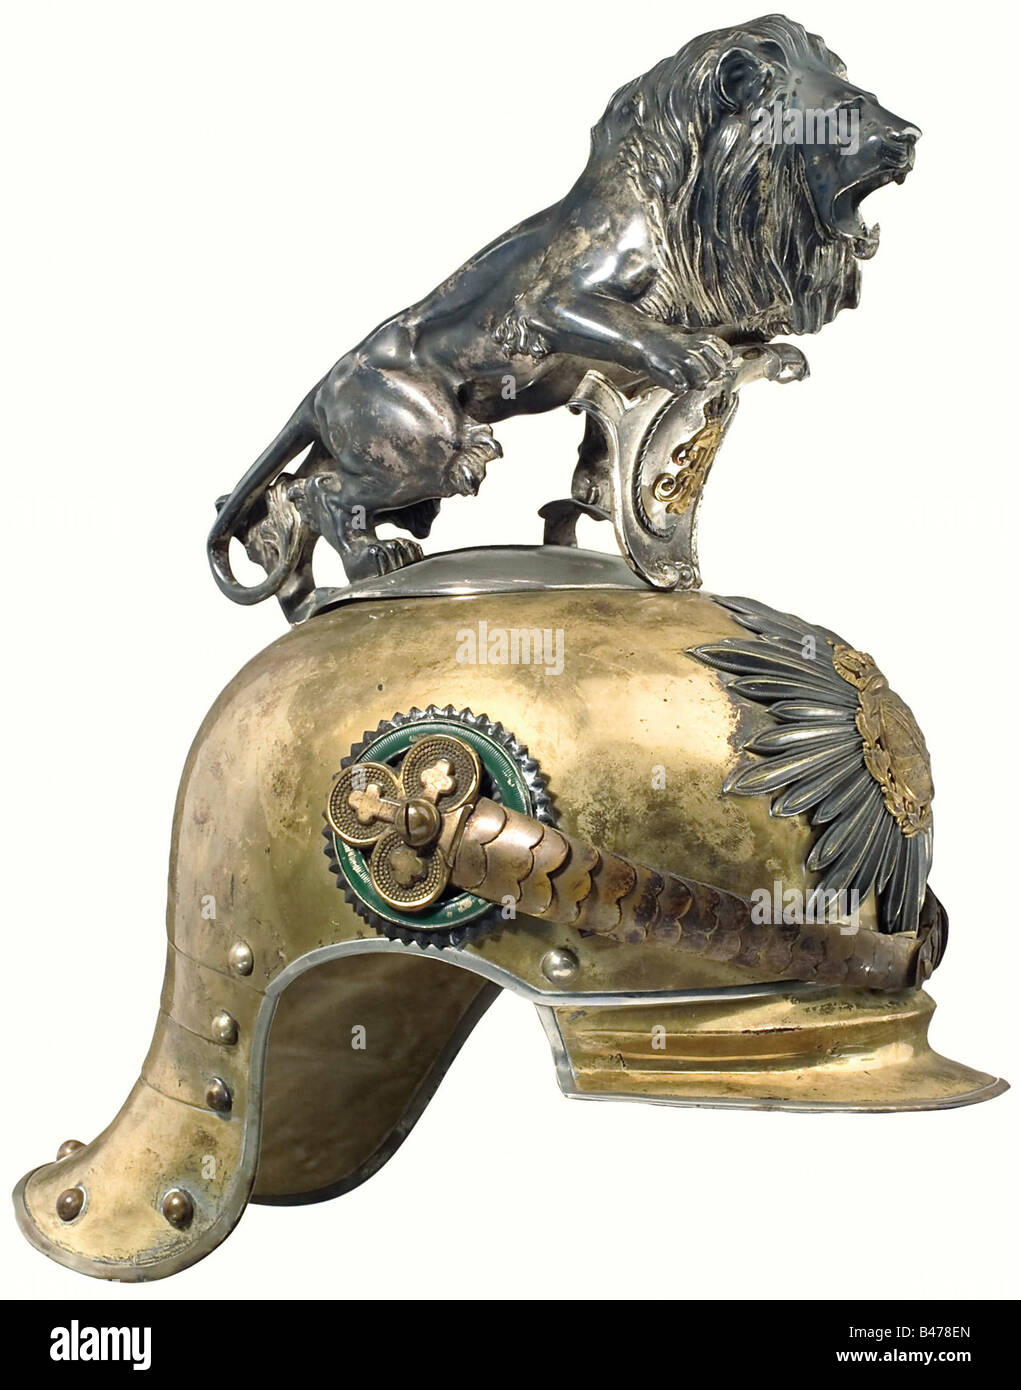 King Friedrich August III, (1865 - 1932). A helmet for an Officer of the Royal Saxon Horse Guard Regiment (1st Heavy Regiment). Gold electroplated tombac helmet skull in a special light version. Silver ceremonial crest in the shape of a lion on a nickel-plated base. Silver-plated star emblem bearing a gold plated coat of arms. Metal chinscales with remnants of gilding on clover leaf shaped rosettes. Officer's cockade. The brim and neck protector are lined with écru coloured velvet. Ribbed silk lining with a somewhat faded monogram, 'F.A.' beneath a crown. Light, Stock Photo